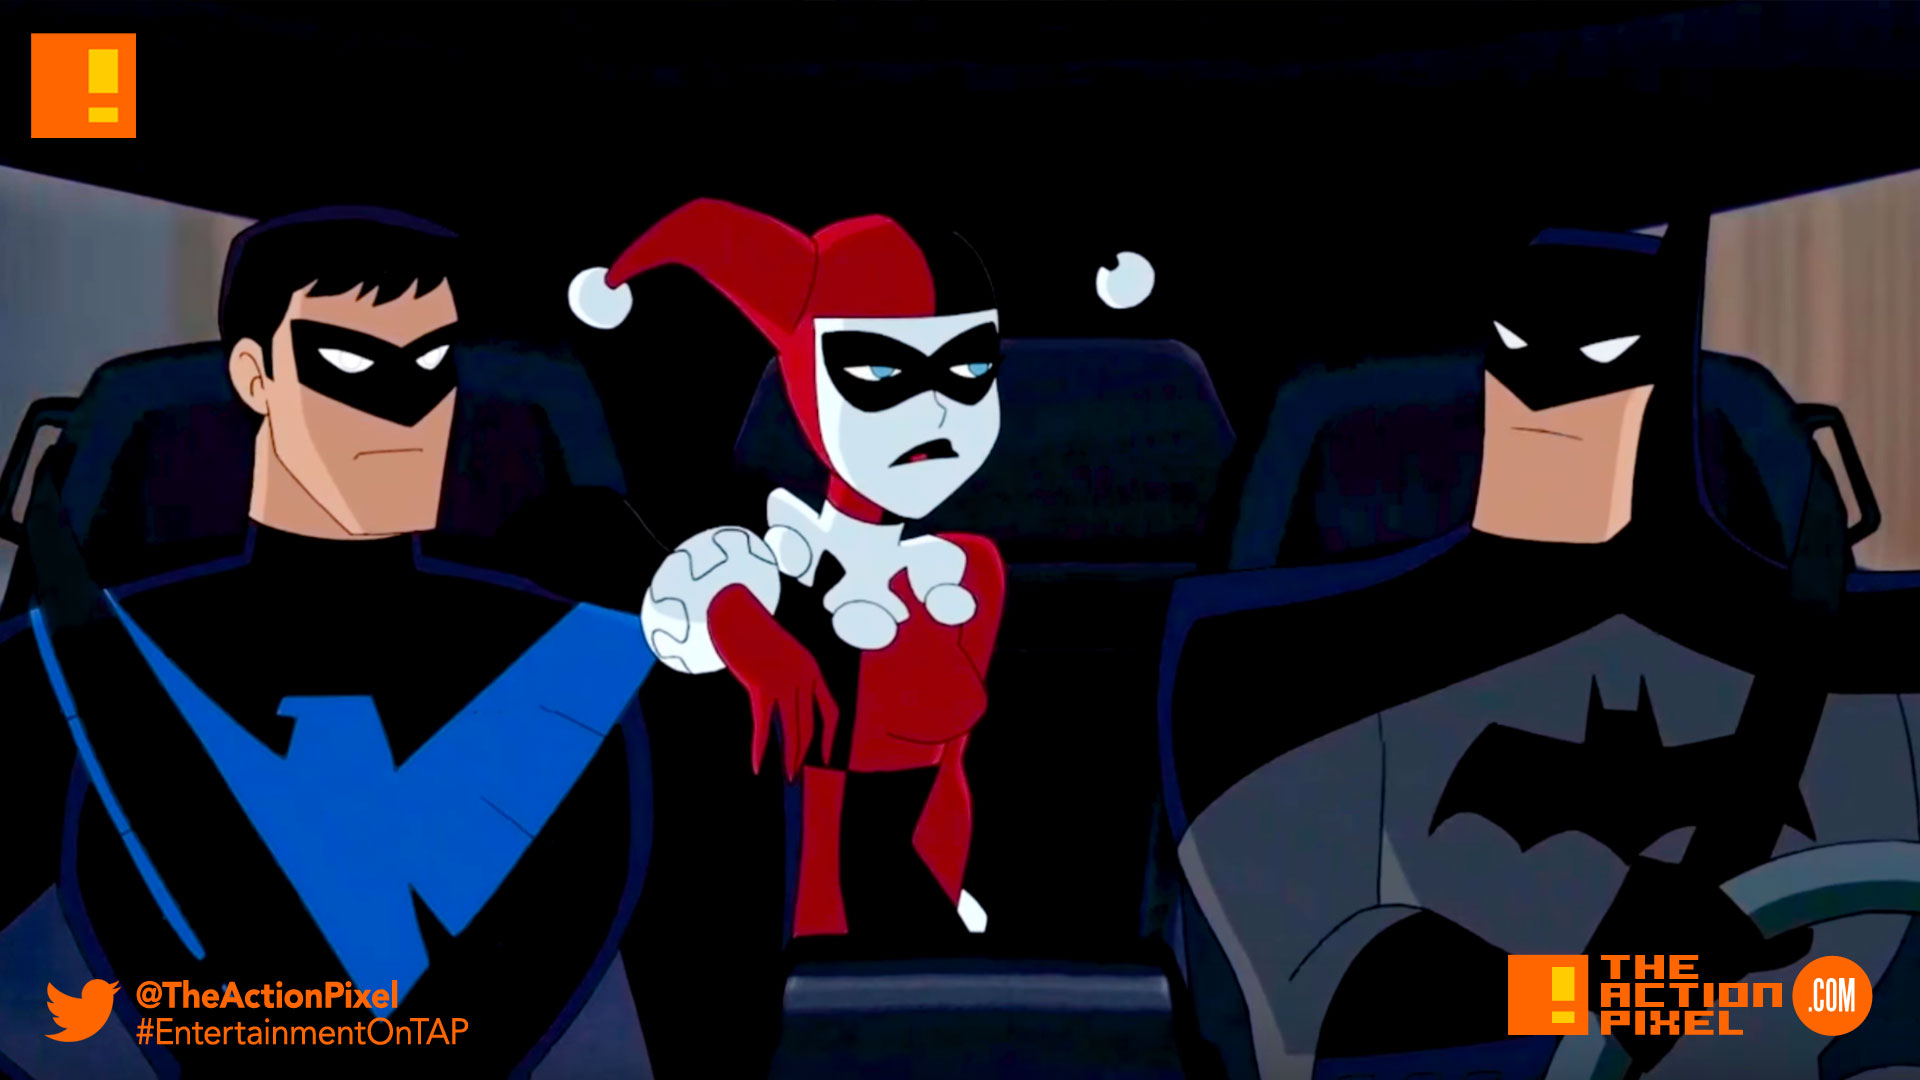 batman, Harley Quinn, batman and harley quinn, the action pixel, entertainment on tap, nightwing